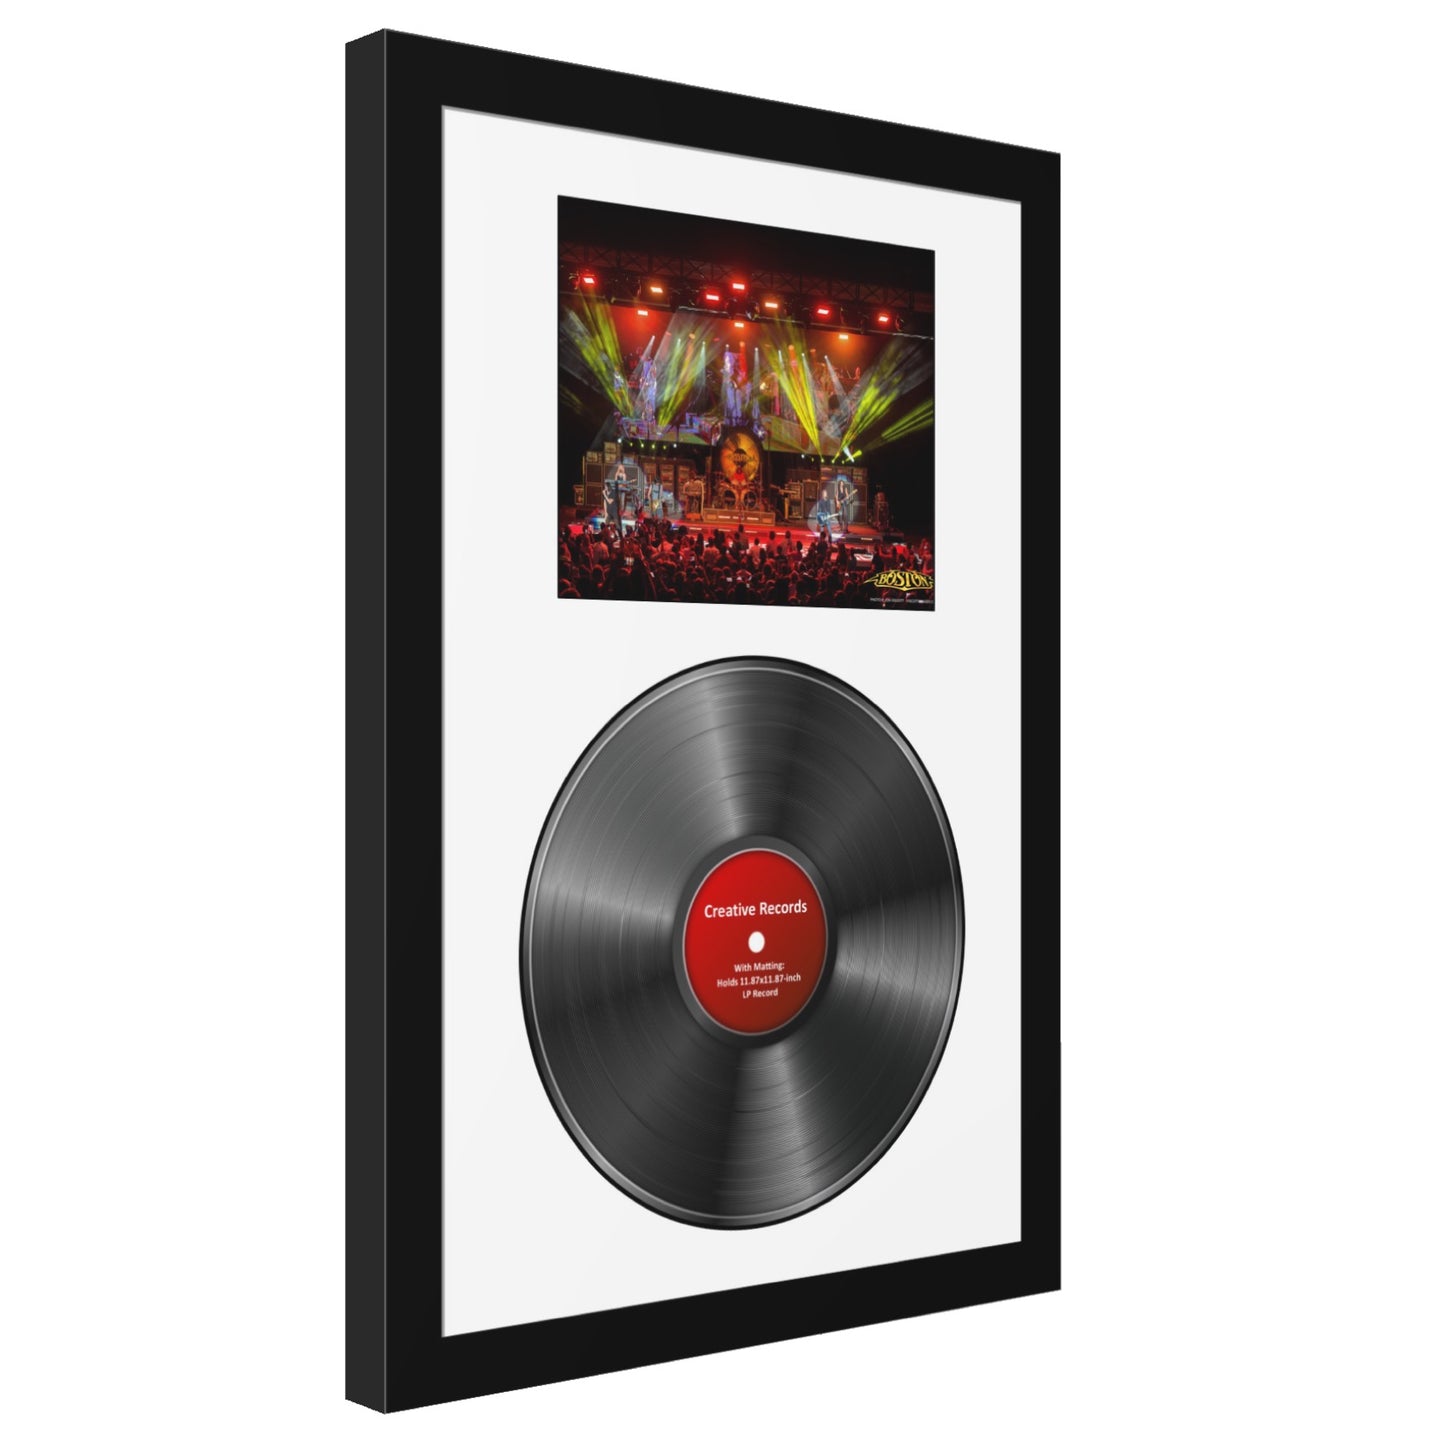 12" Vinyl Record Disc and 8x10 Photo with Mat in our Manhattan Black Molding